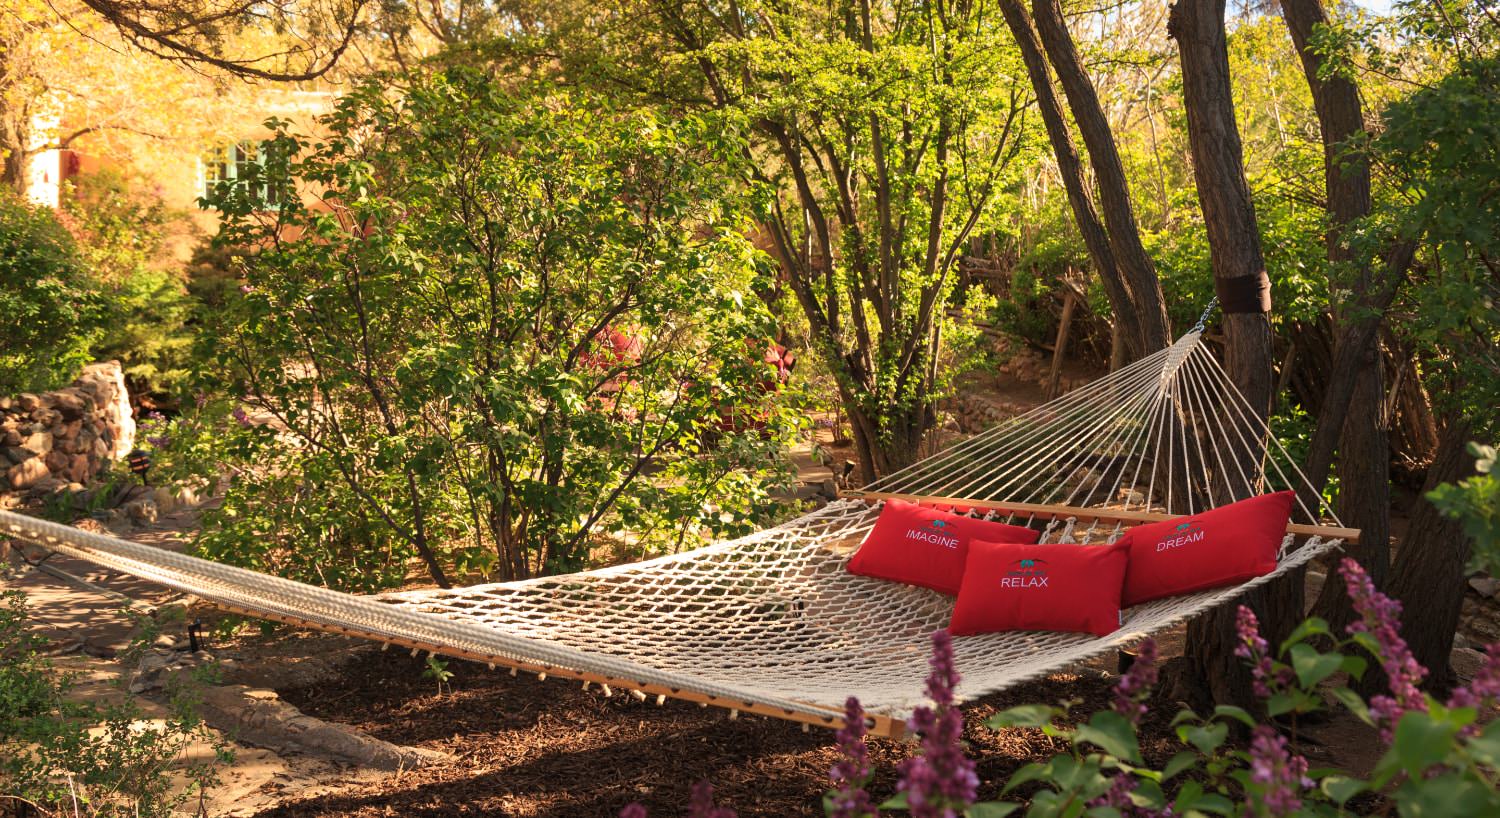 Hammock with red pillows surrounded by green bushes and trees